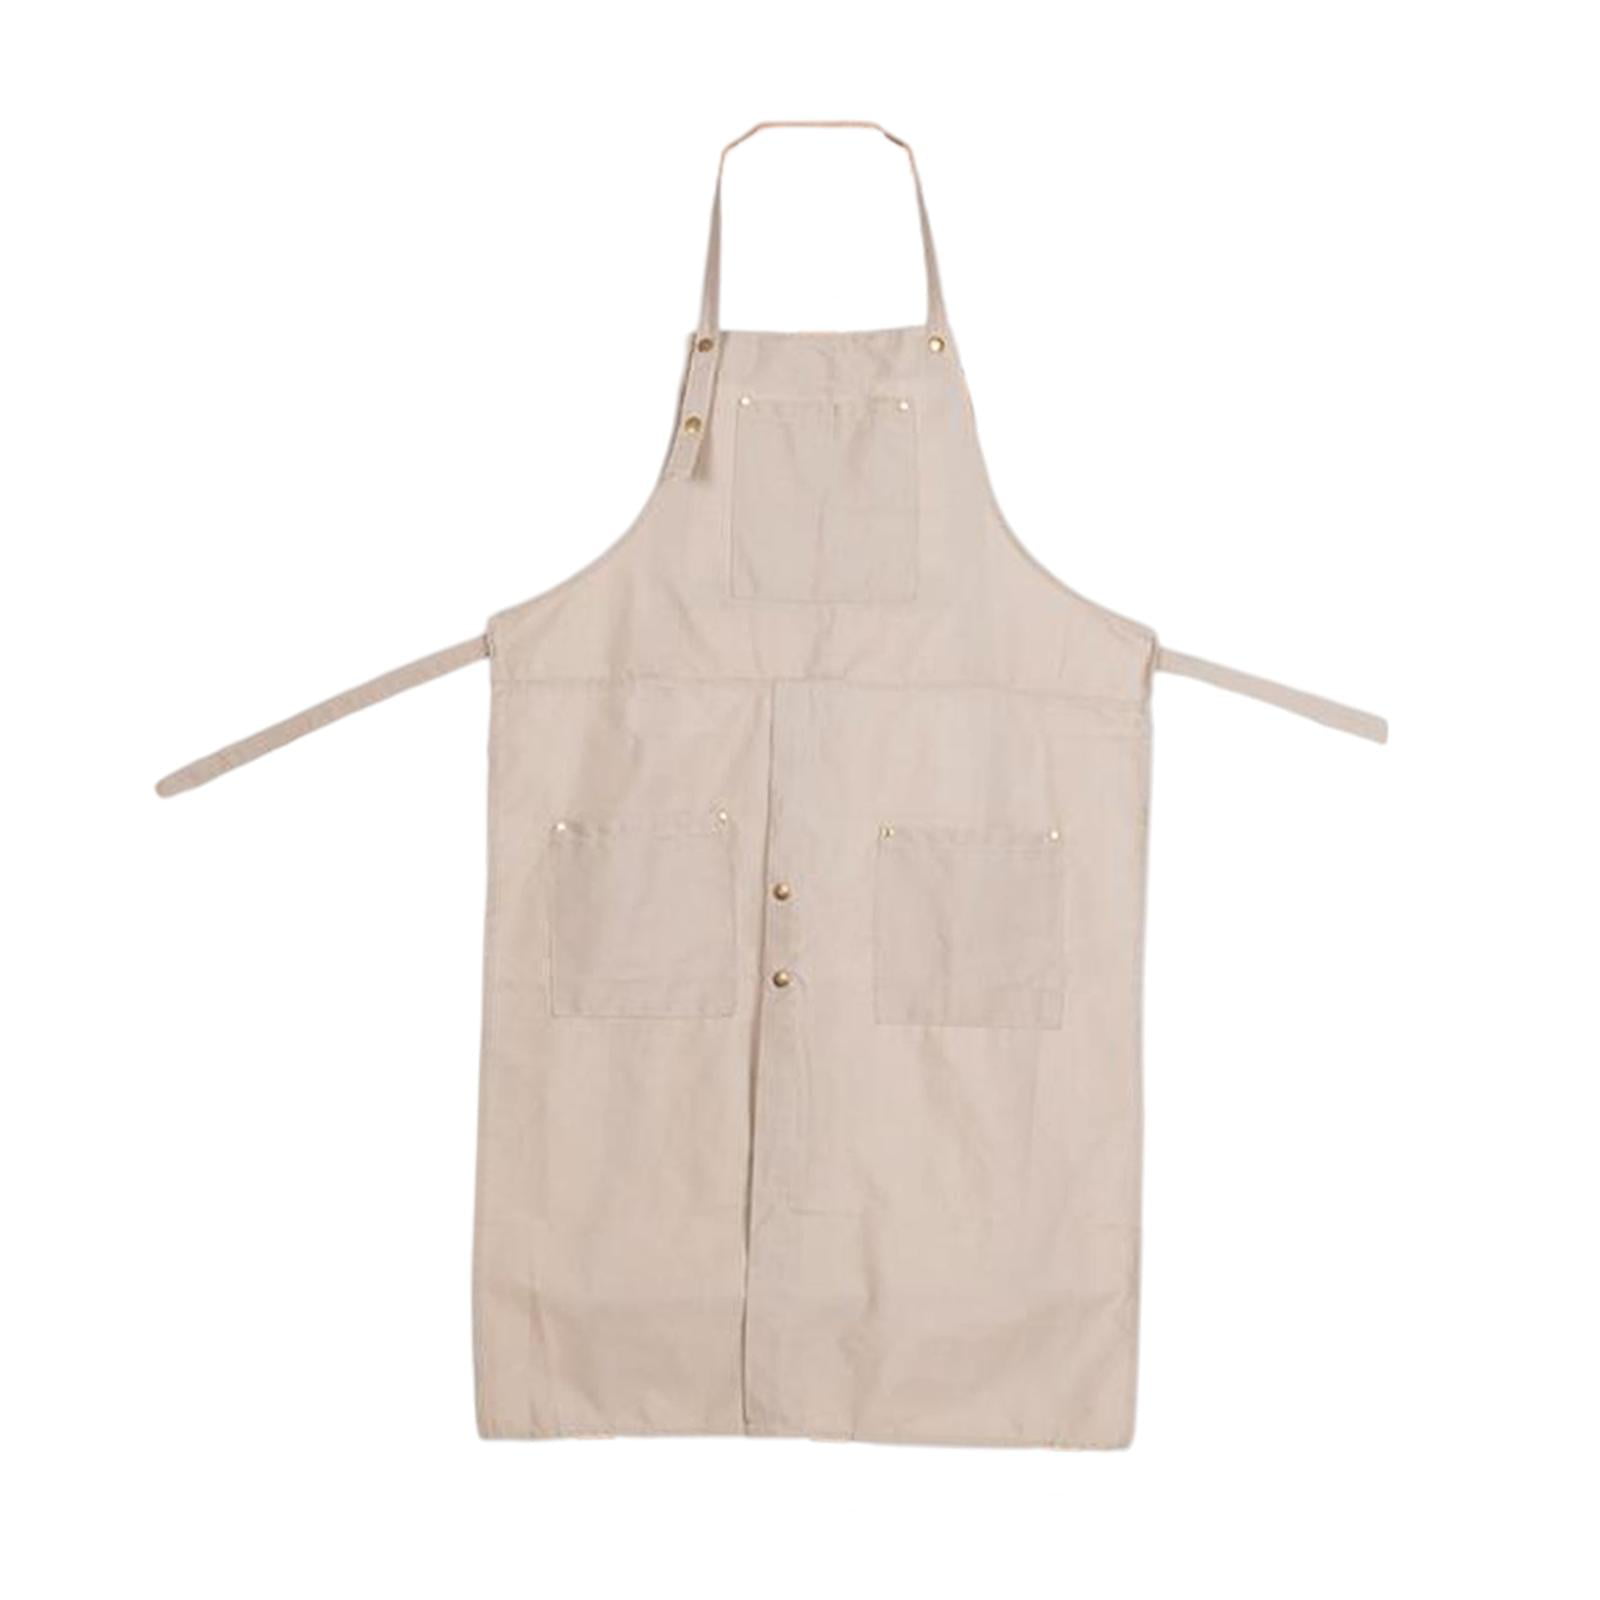 Artist painting canvas apron with pockets - UGSS1178 - IdeaStage